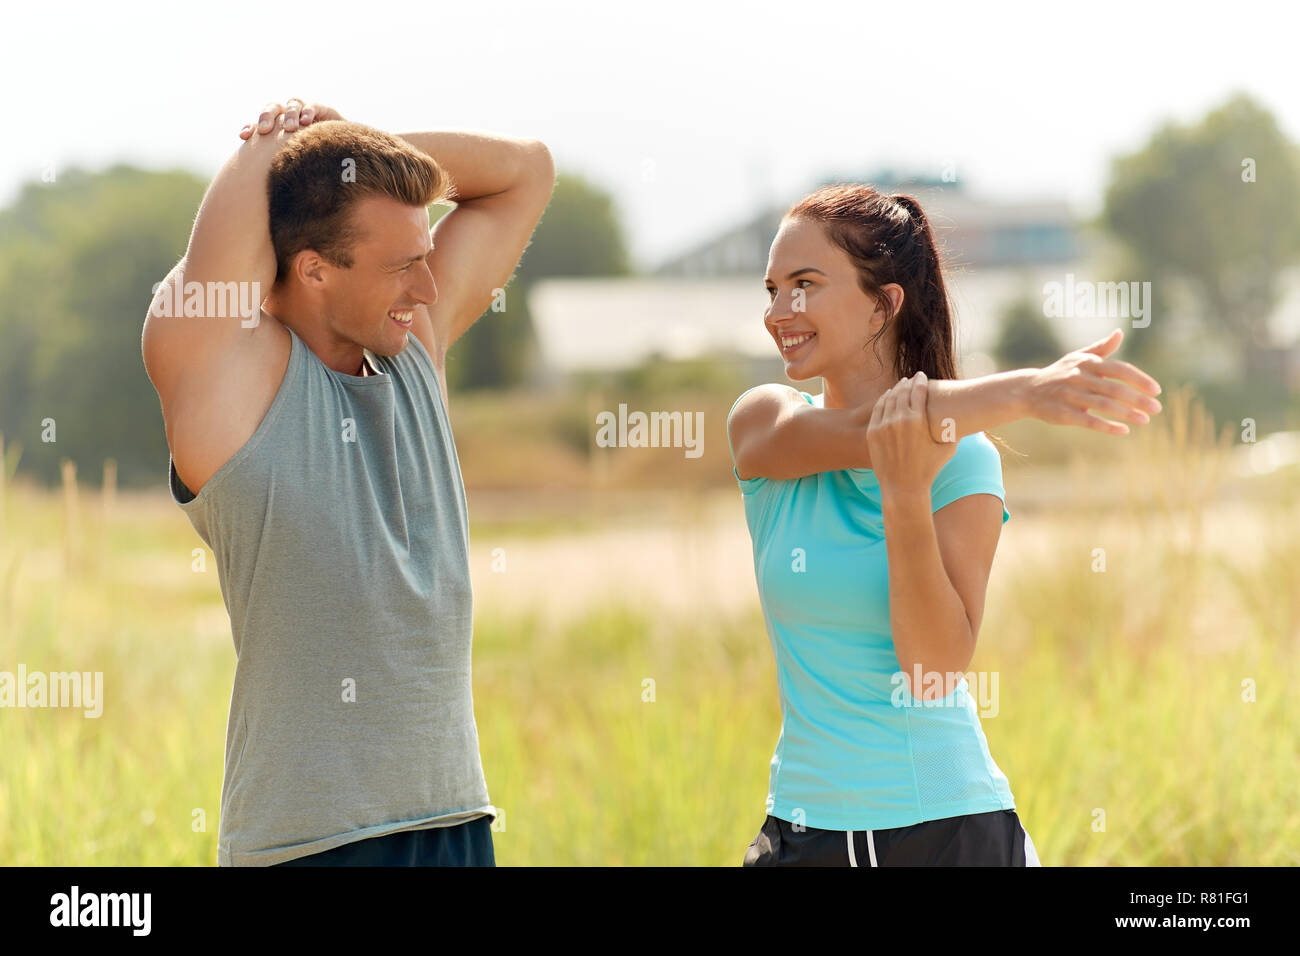 Smiling couple stretching outdoors Banque D'Images